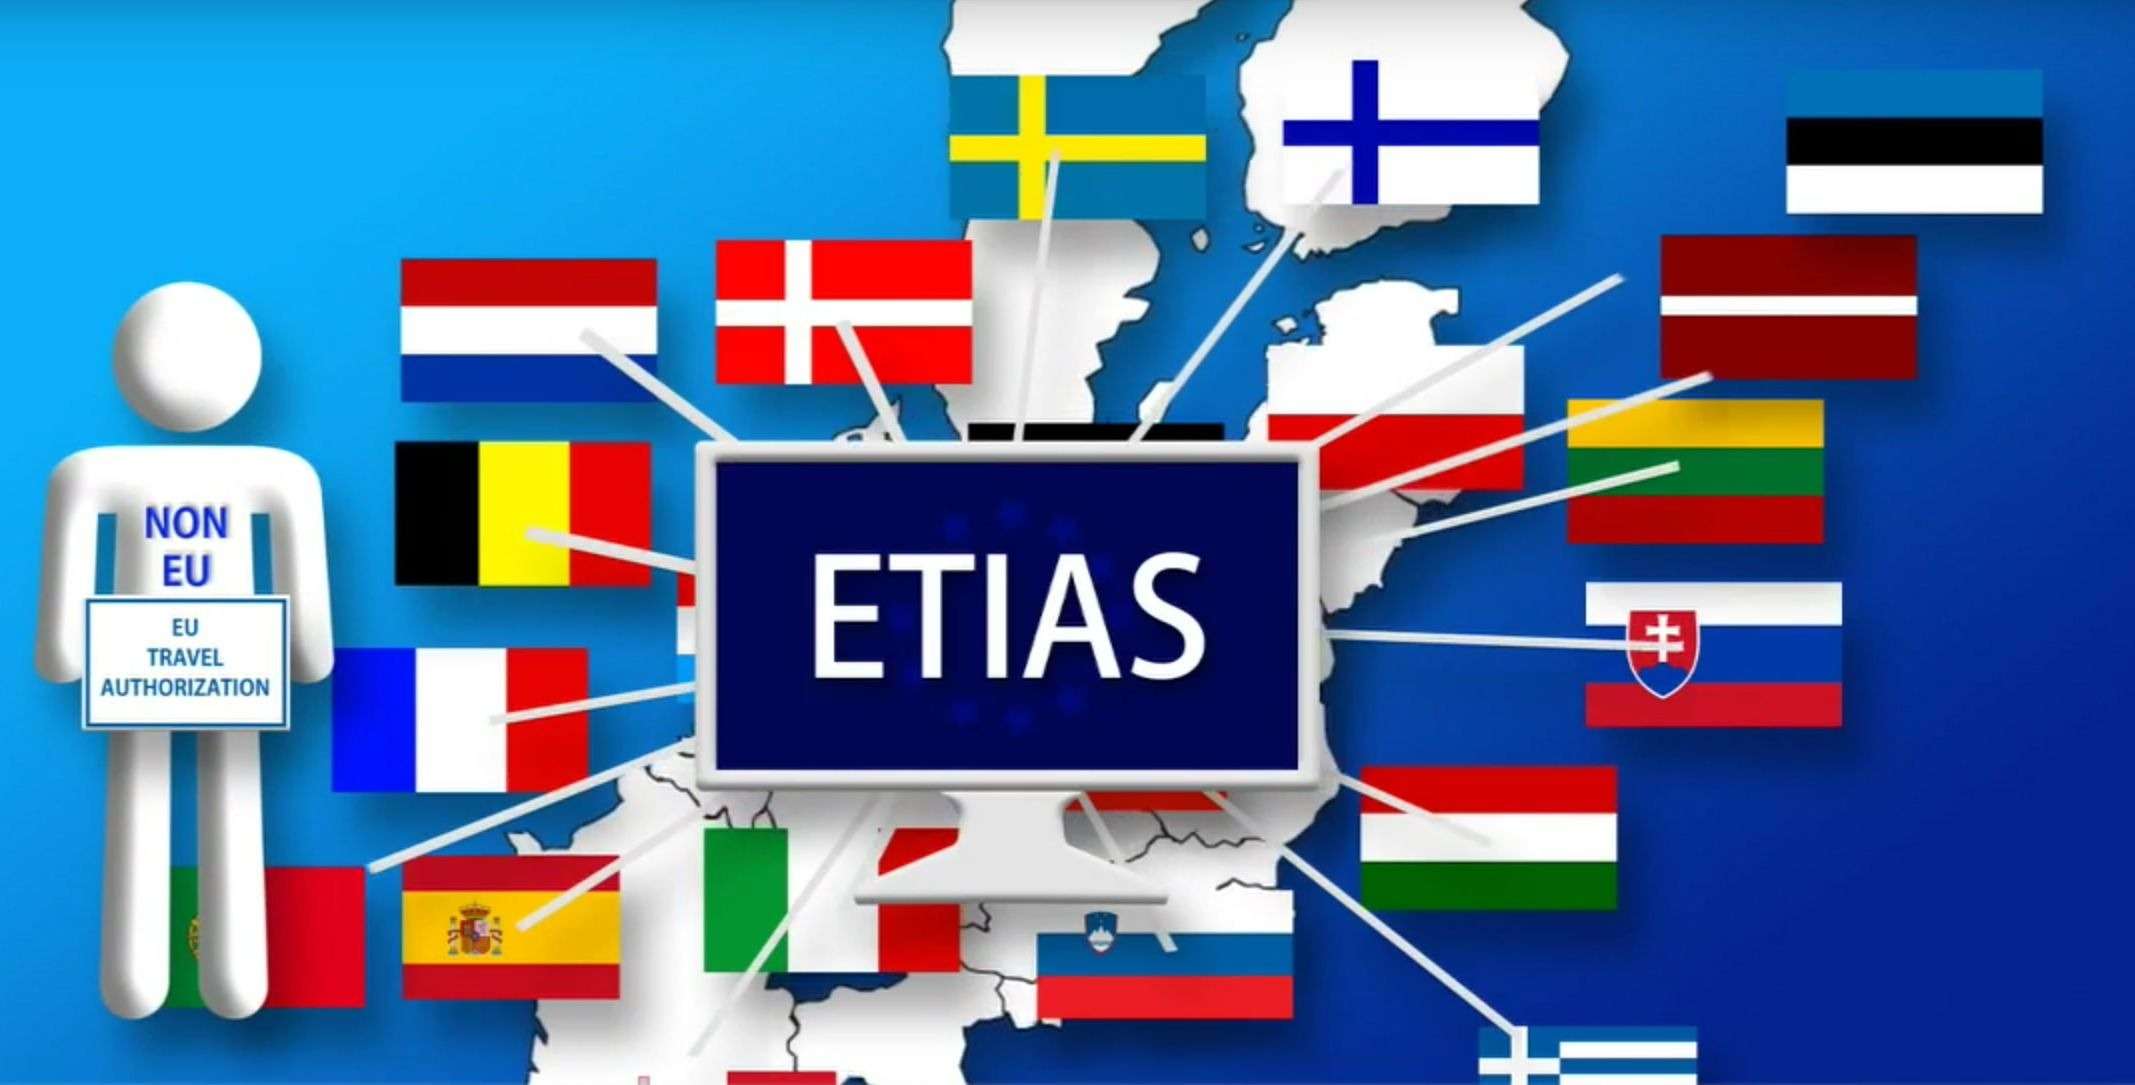 What is ETIAS and why it is important?